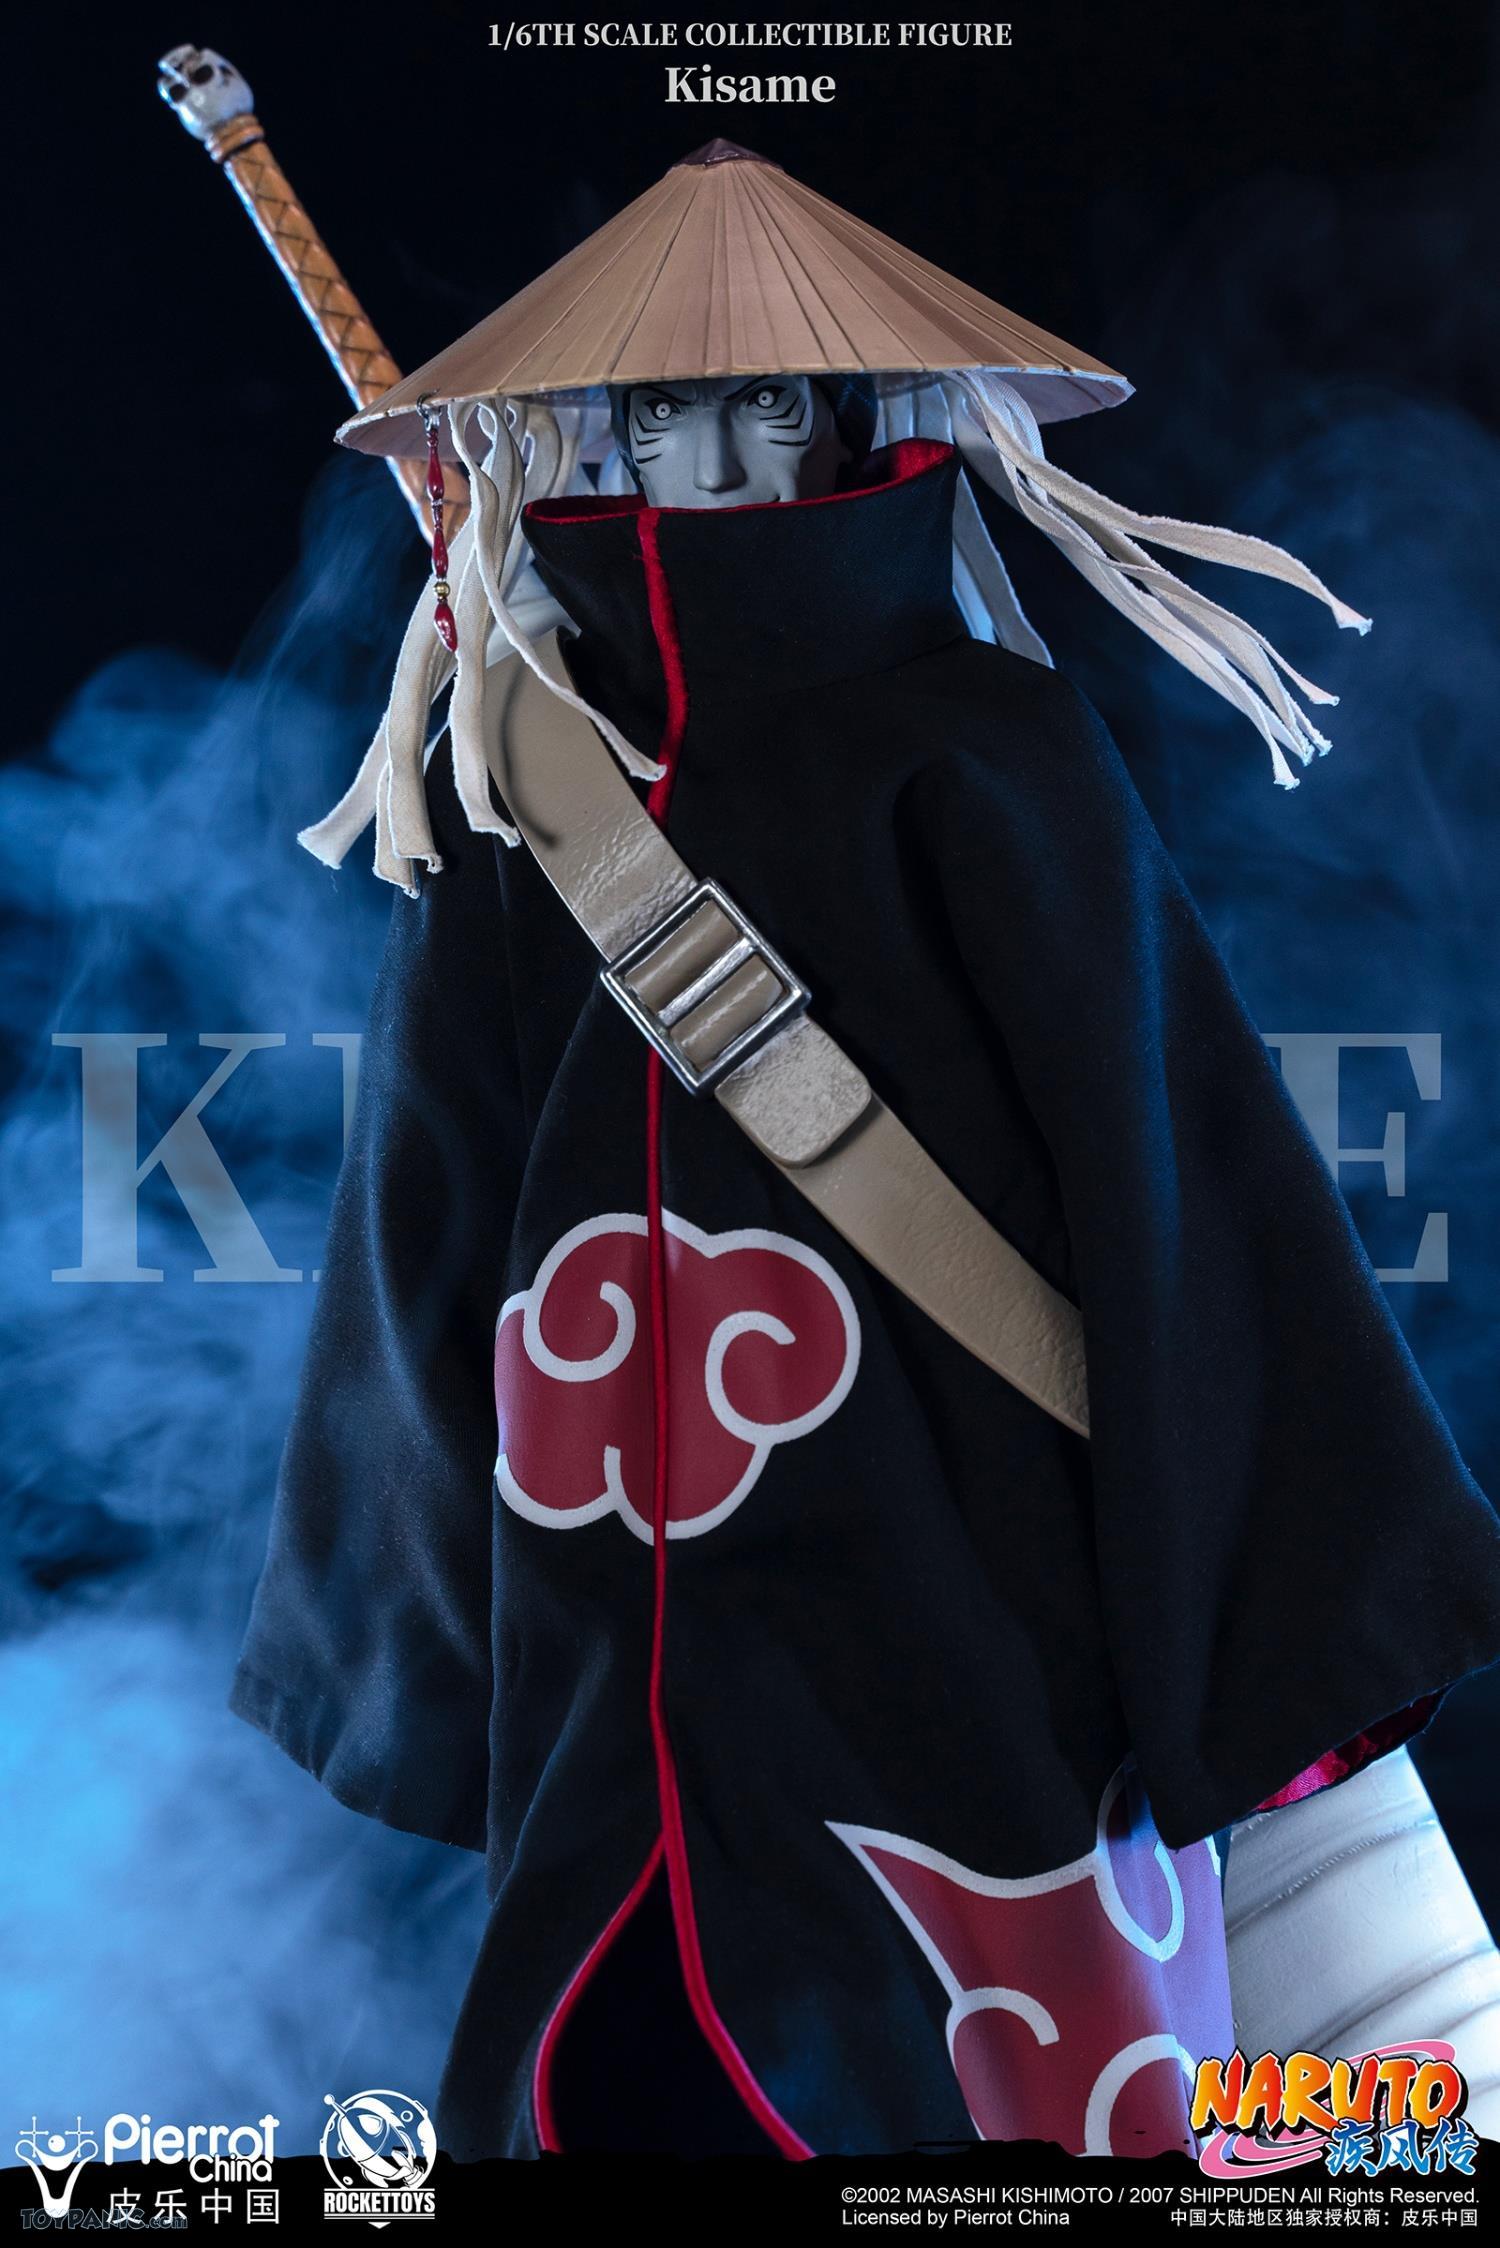 NEW PRODUCT: Rocket Toys ROC-007 1/6 Scale Kisame 221202460439PM_517257